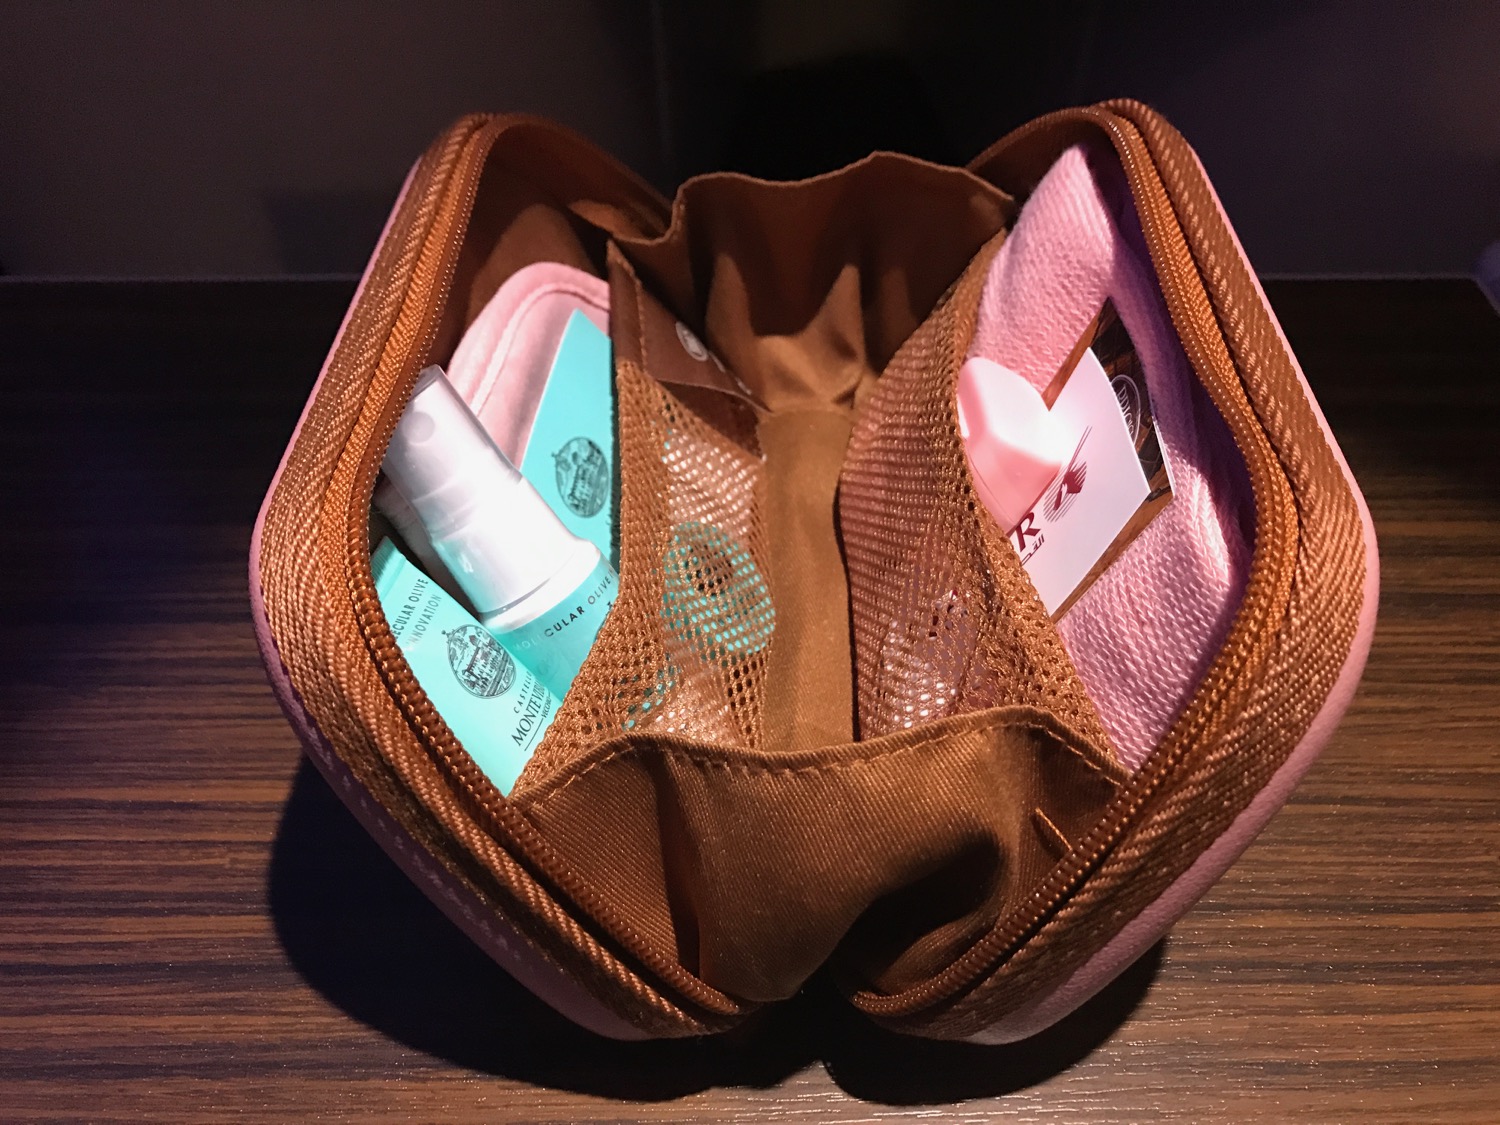 a small pink pouch with a small spray bottle inside